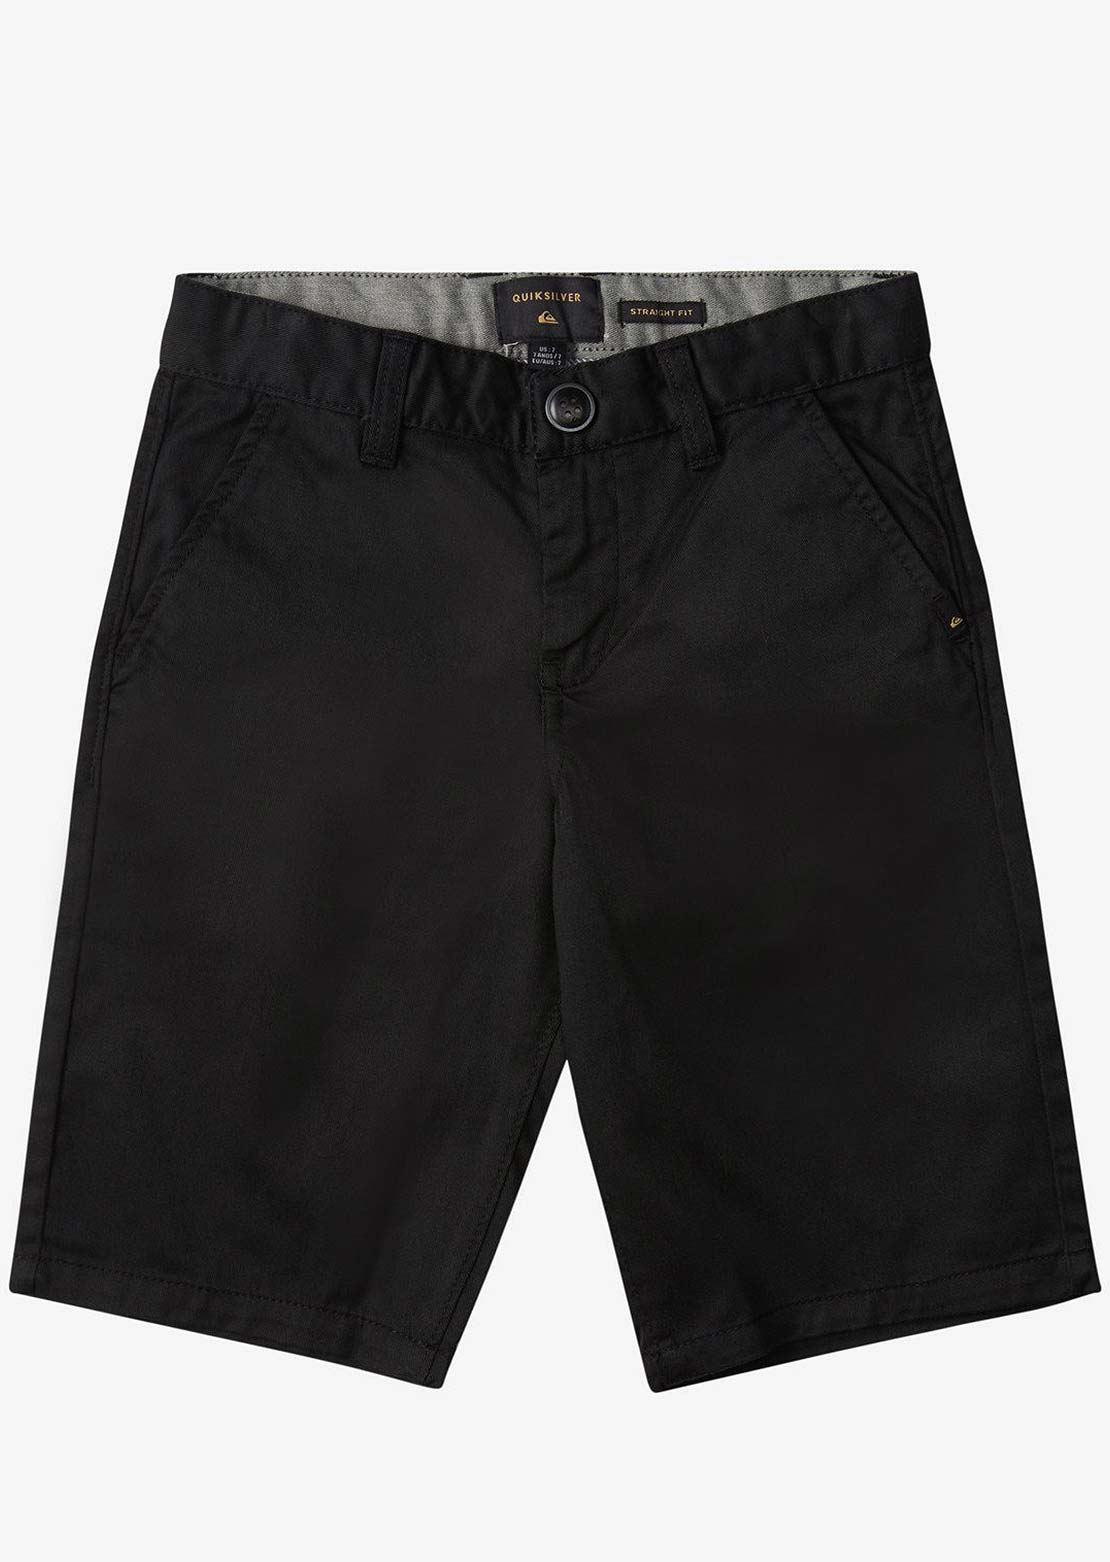 Quiksilver Toddler Everyday Union Stretch Shorts Black